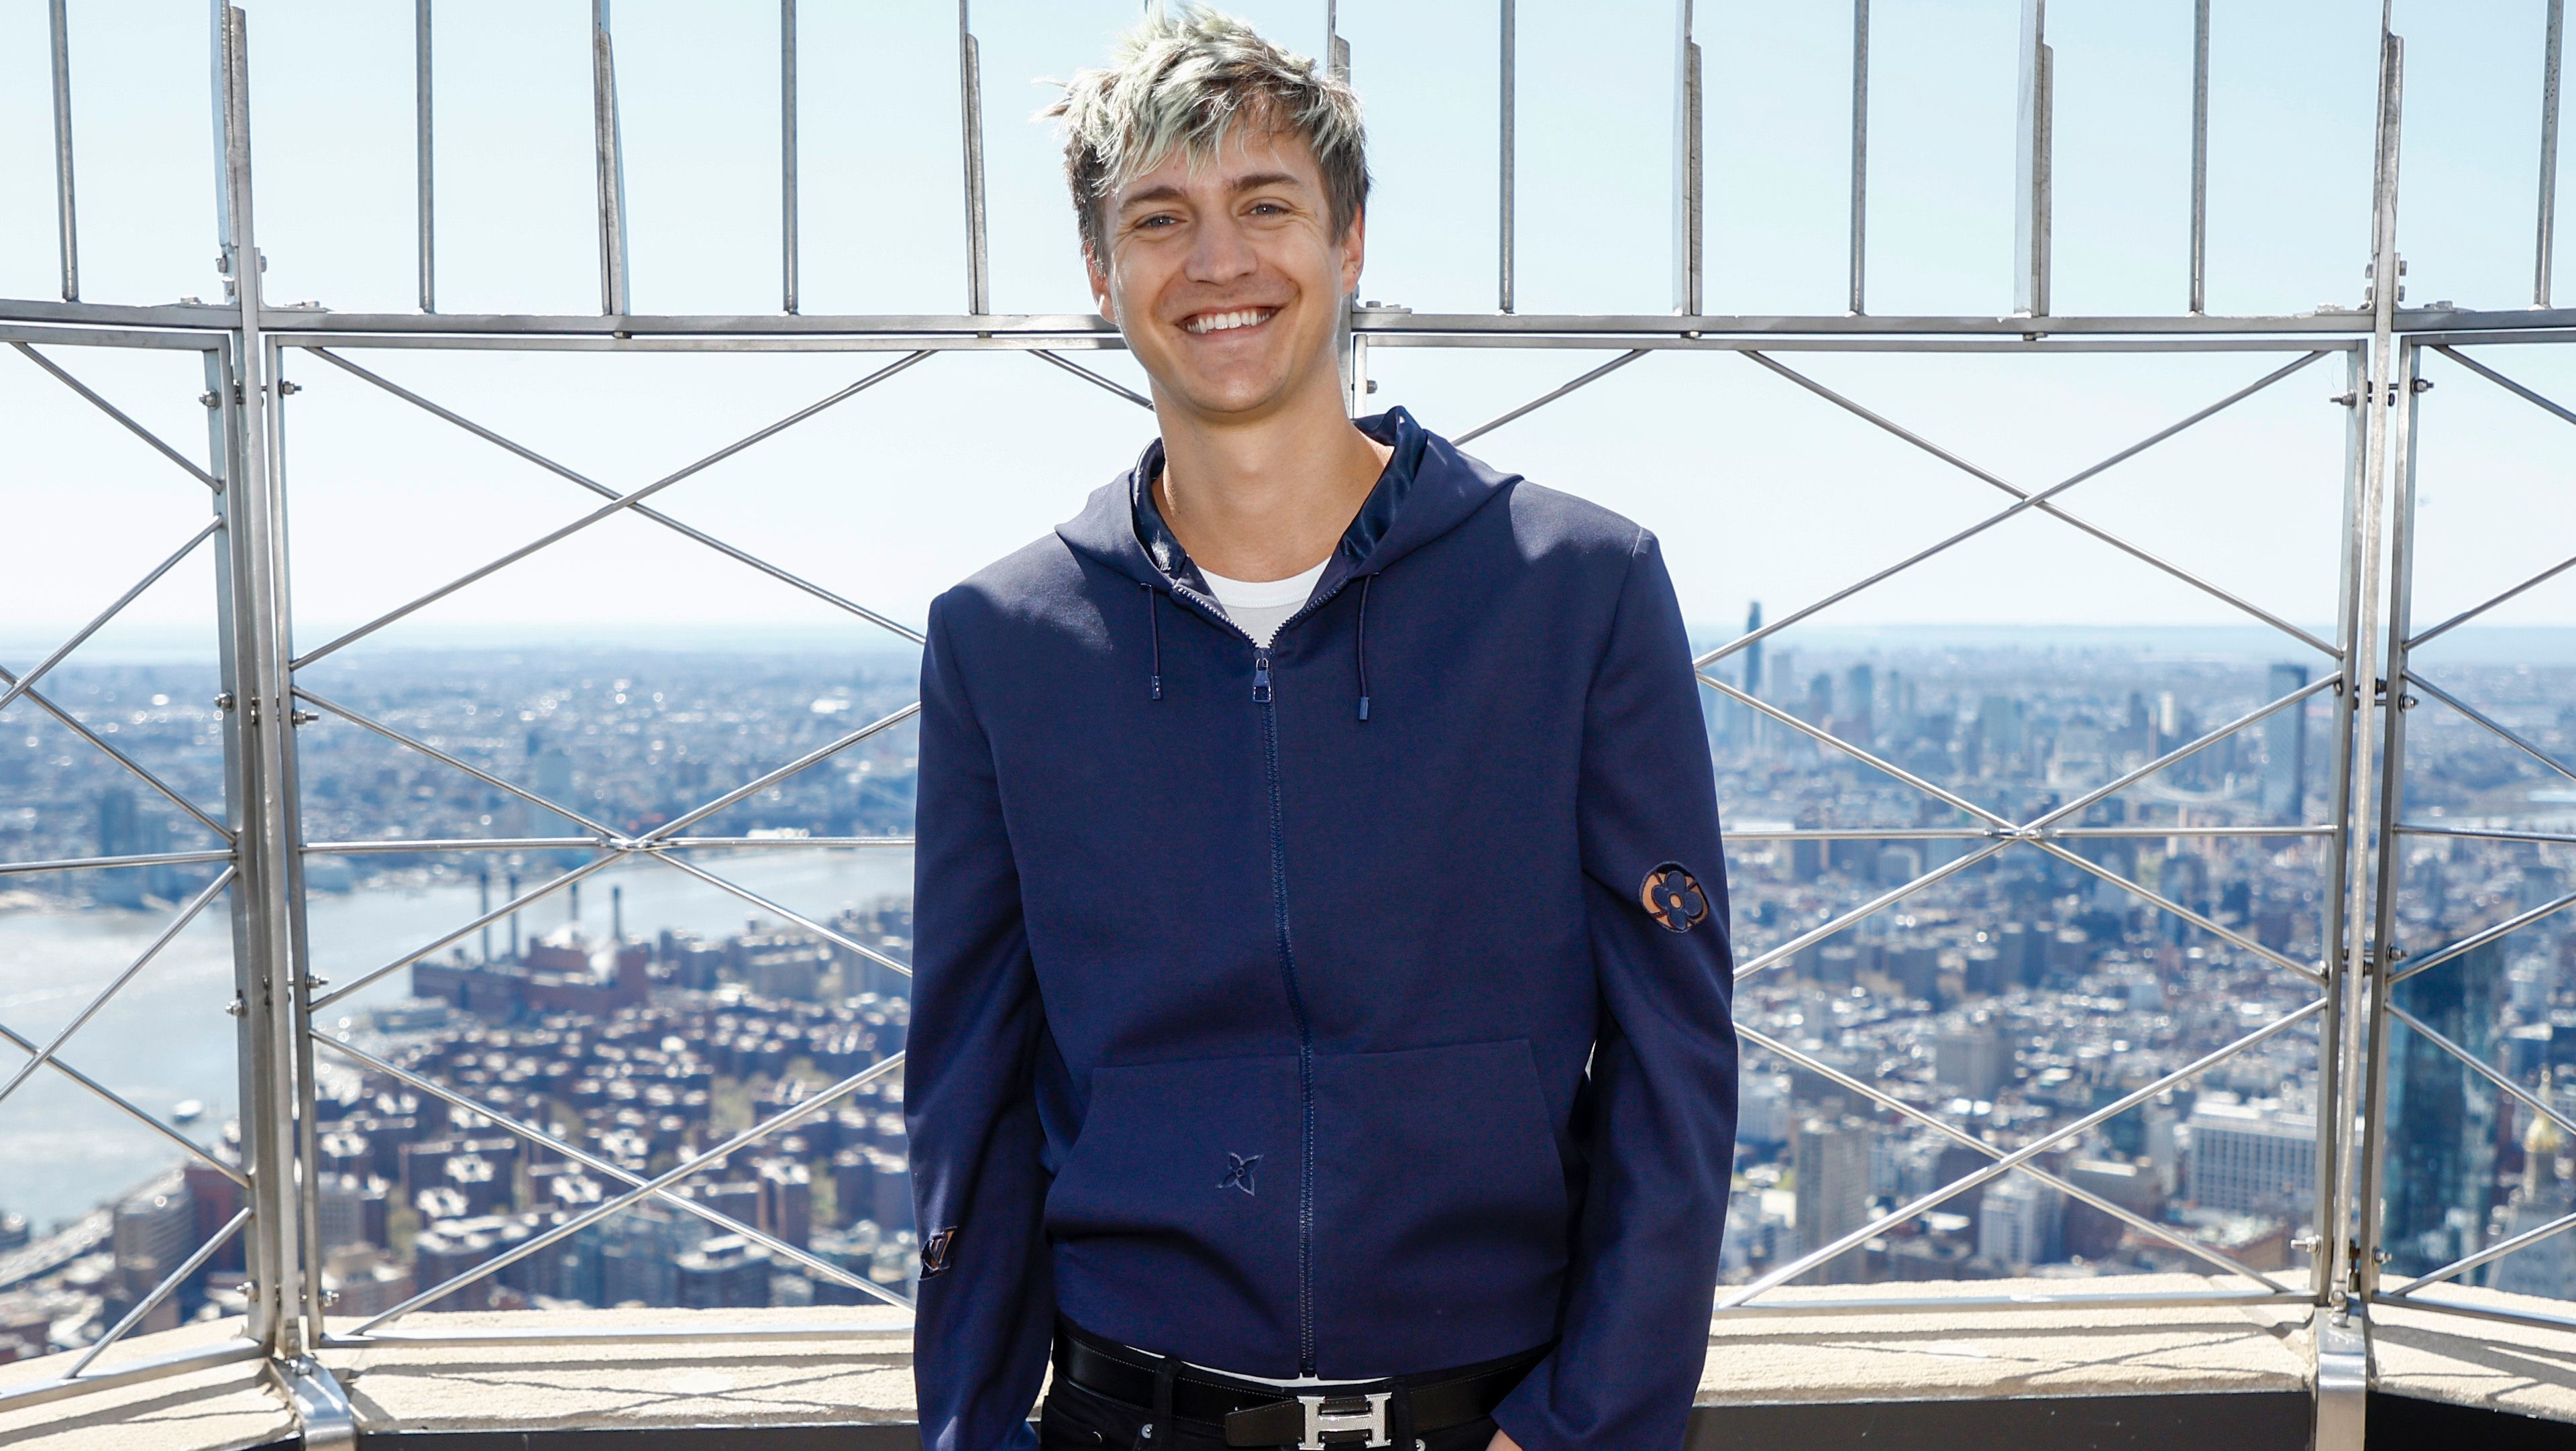  Ninja reveals skin cancer diagnosis: 'Please take this as a PSA to get skin checkups' 